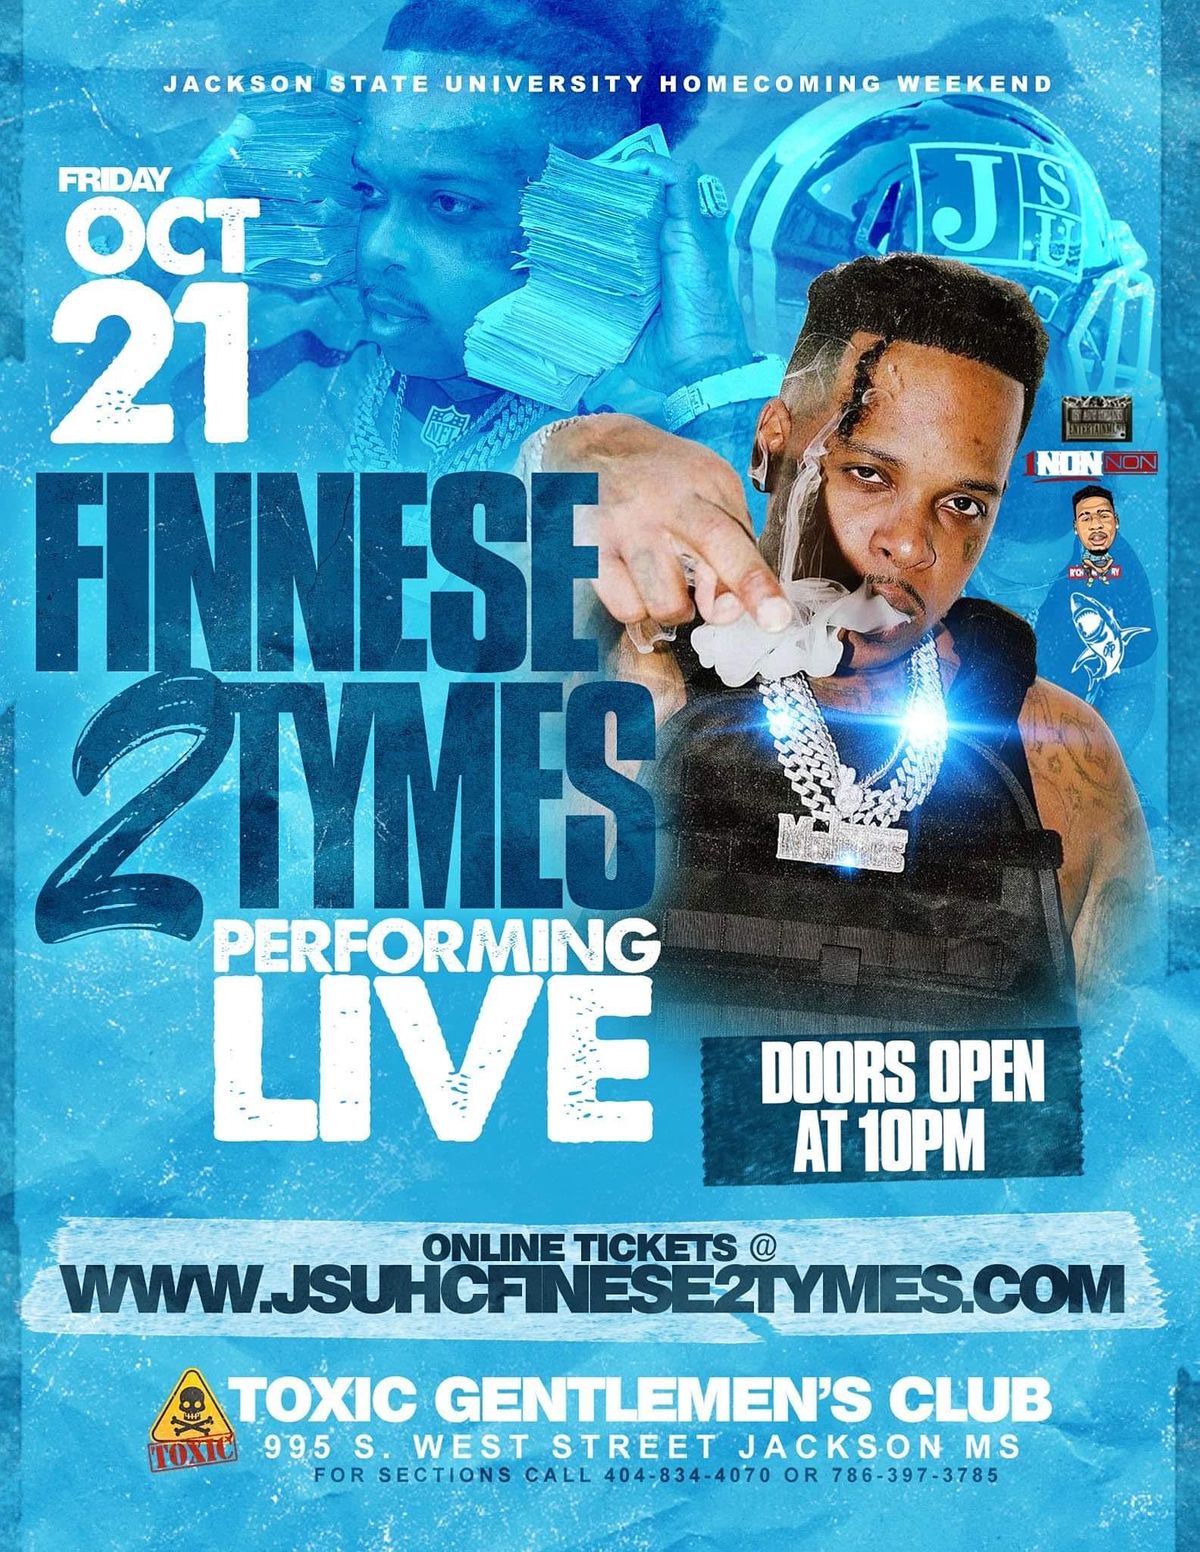 Finesse 2 Times Jackson State Club Toxic Friday Oct. 21